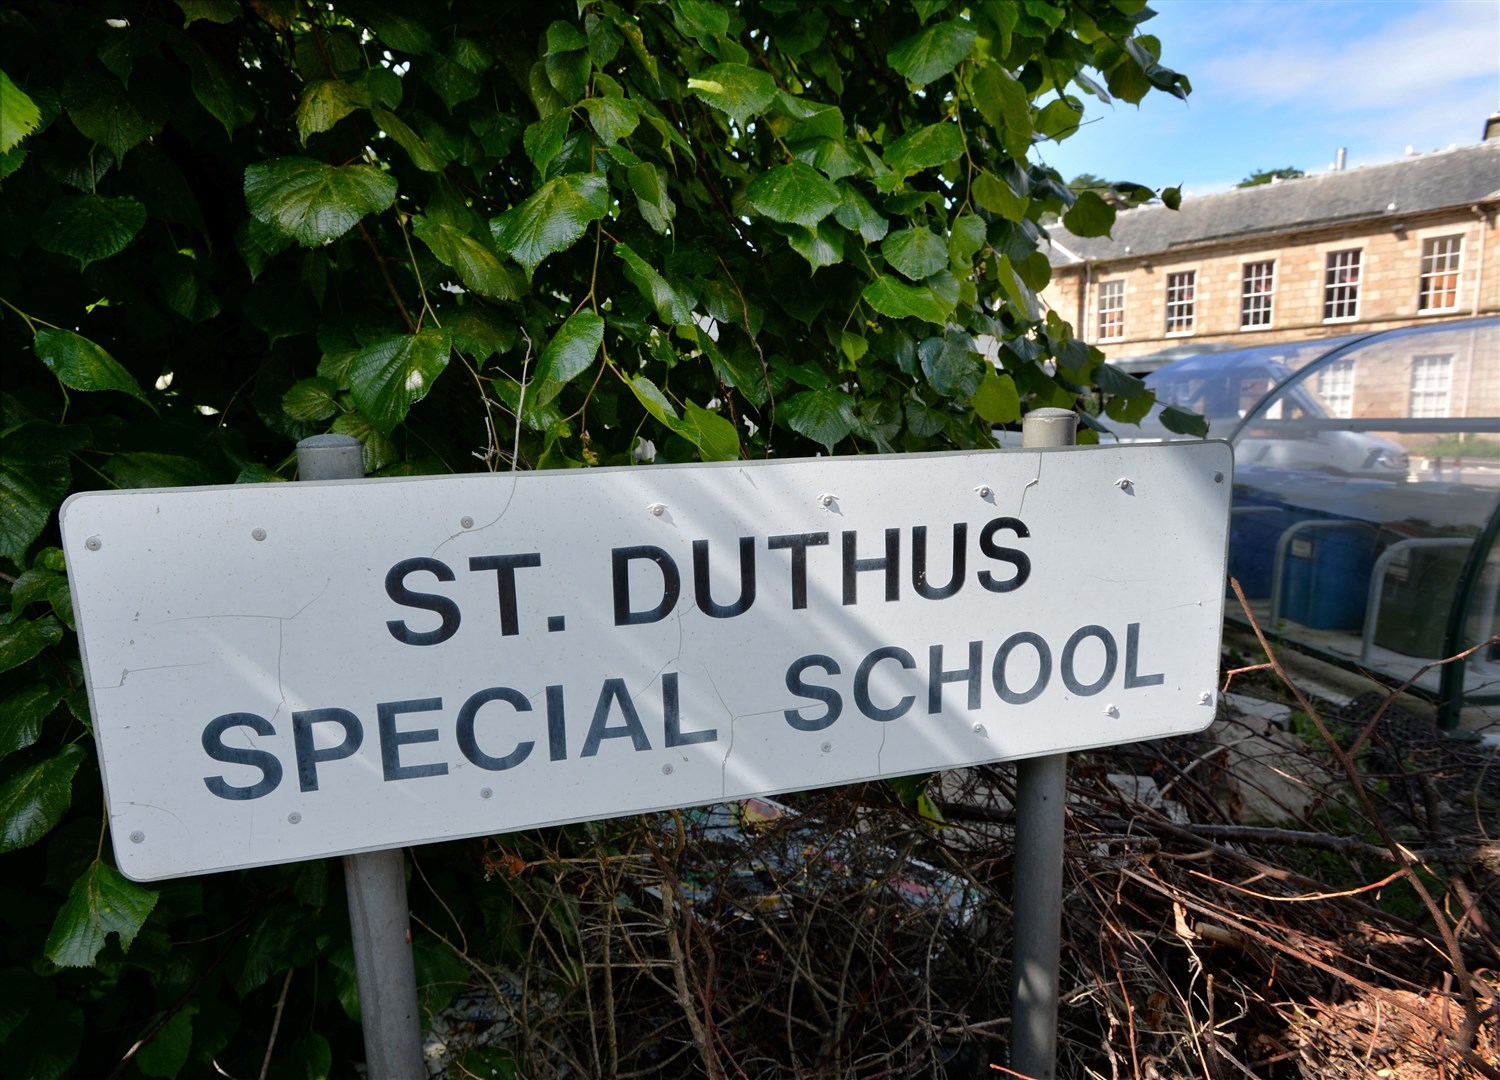 St Duthus in Tain was closed today because of a fault with its water system.